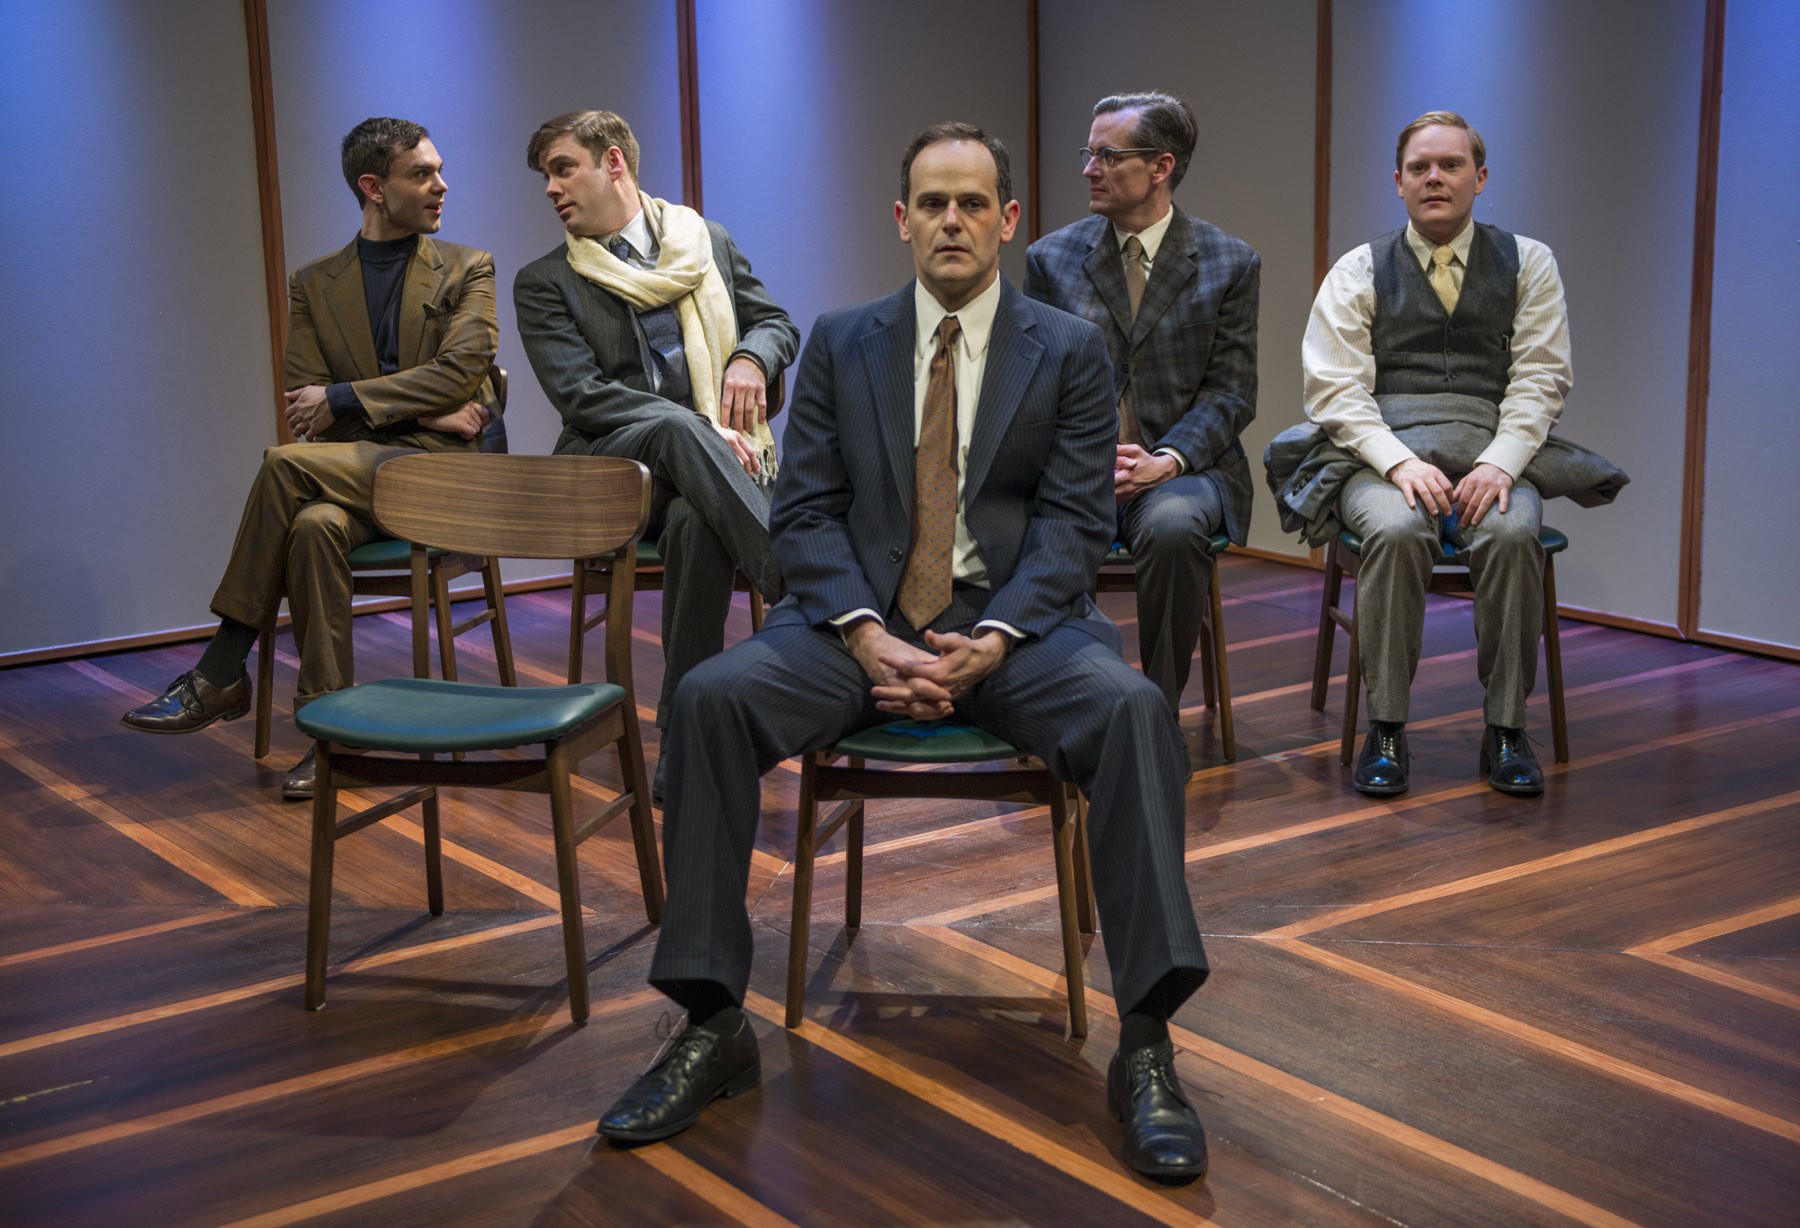 About Face Theatre's THE TEMPERAMENTALS - Through February 18, 2017 at Theater Wit 2 About Face Theatre is pleased to continue its 2016-17 Season with the Chicago premiere of THE TEMPERAMENTALS, Jon Marans’ Off-Broadway hit about America’s first LGBT rights organization. Directed by Artistic Director Andrew Volkoff, THE TEMPERAMENTALS will play January 13 – February 18, 2017 at Theater Wit, 1229 W. Belmont Ave. in Chicago. Tickets are currently available at aboutfacetheatre.com, by calling (773) 975-8150 or in person at Theater Wit Box Office. 